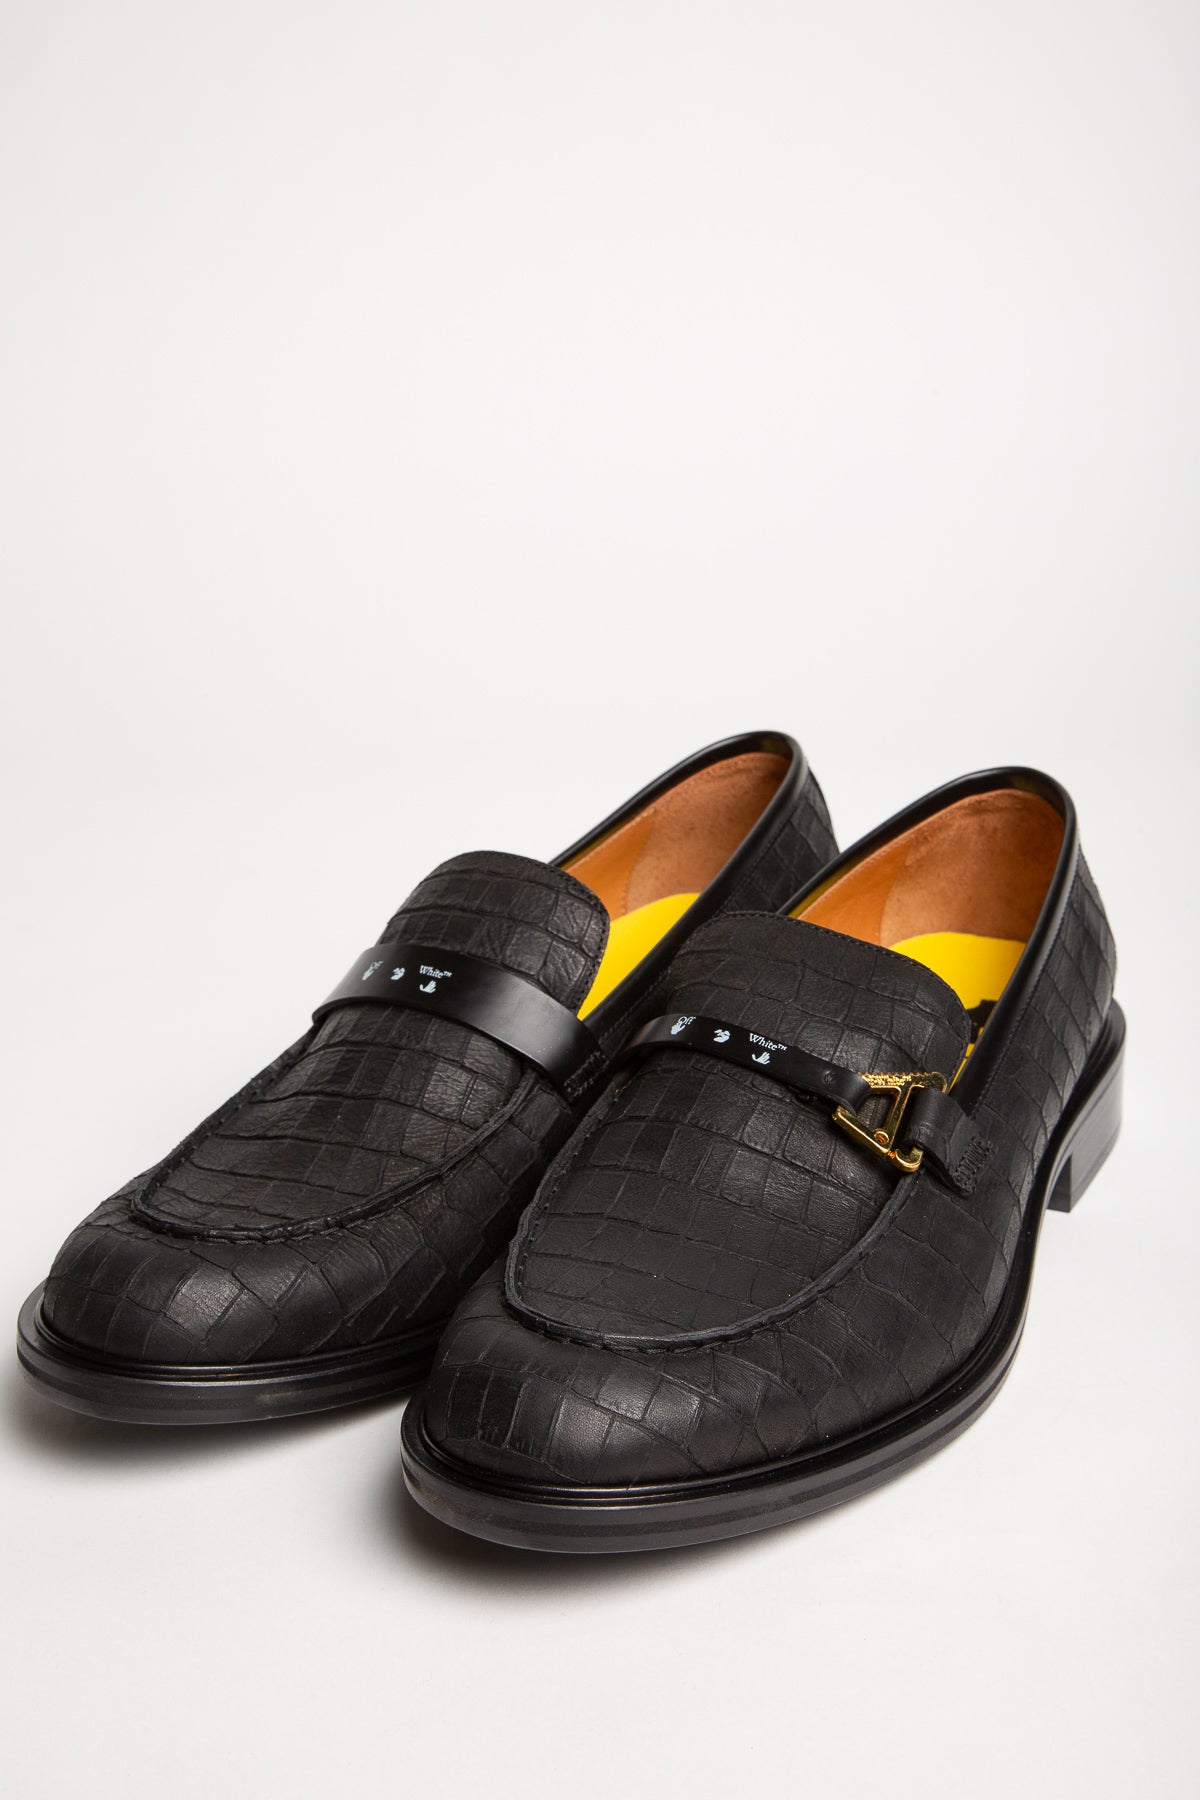 OFF-WHITE | BLACK CROC-EMBOSSED LOAFERS